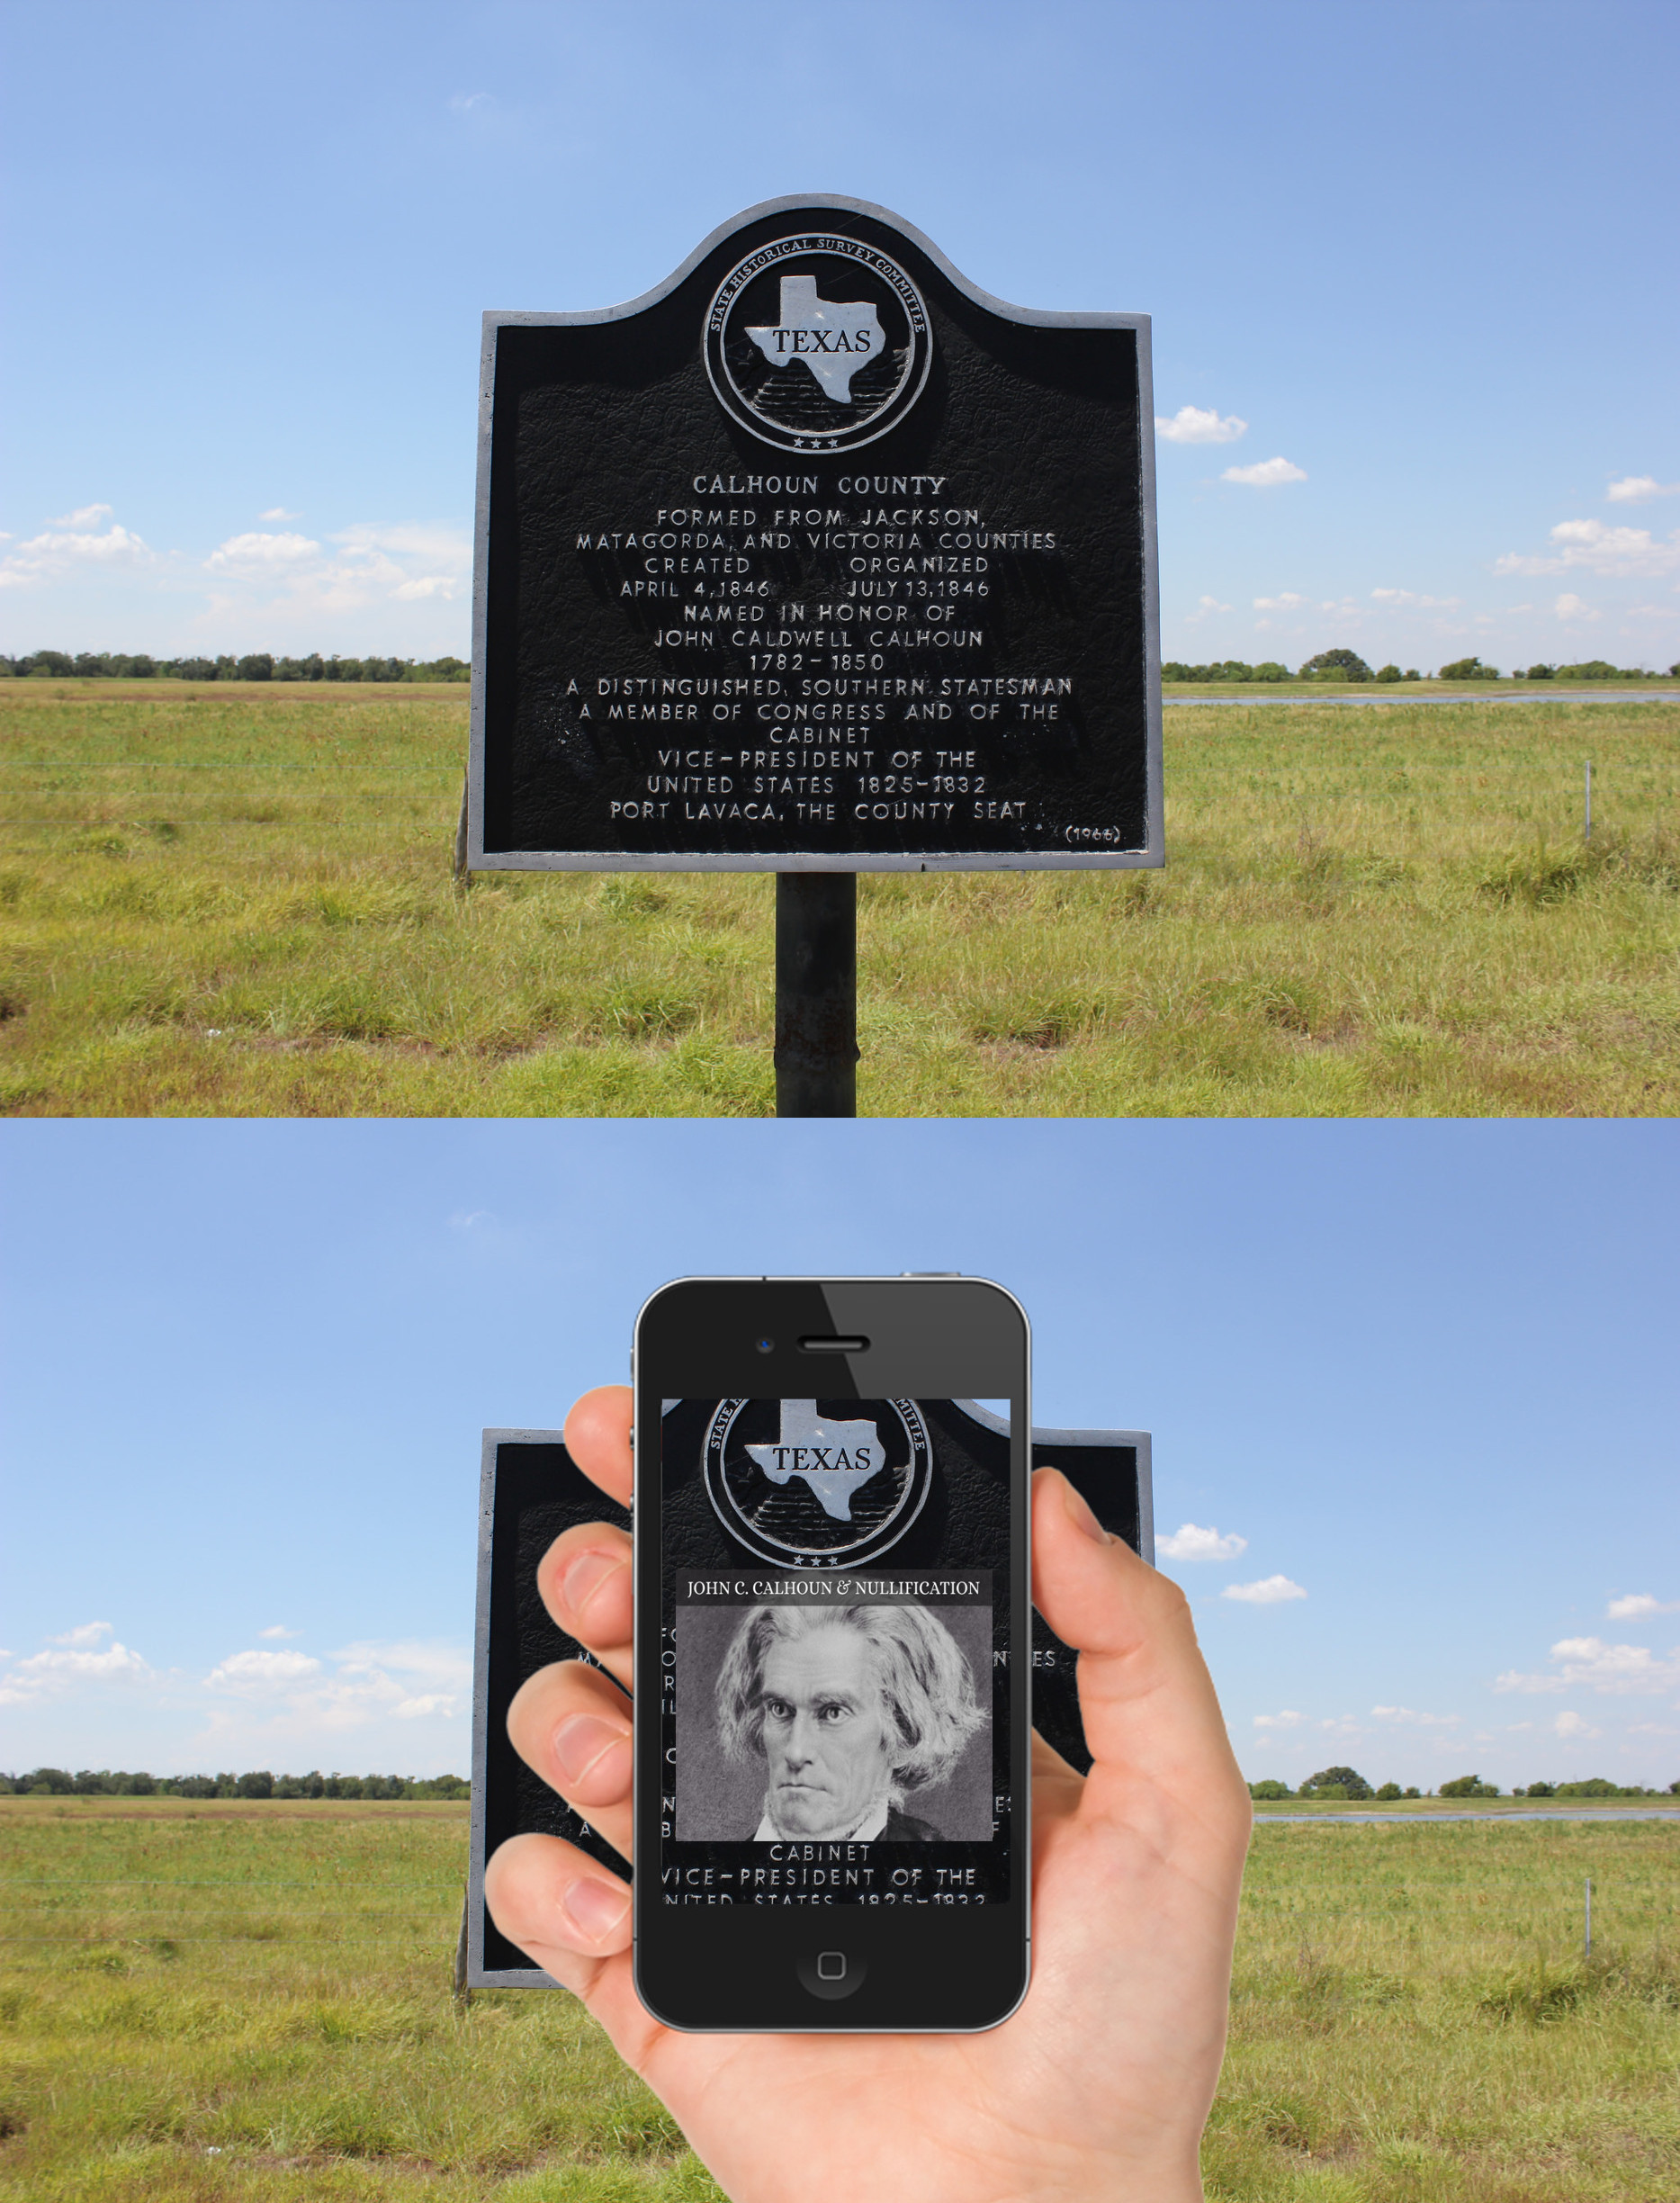 Augmented reality can be used to overlay digital information onto existing texts such as historical markers. This modified image is based on a photograph by Nicholas Henderson.